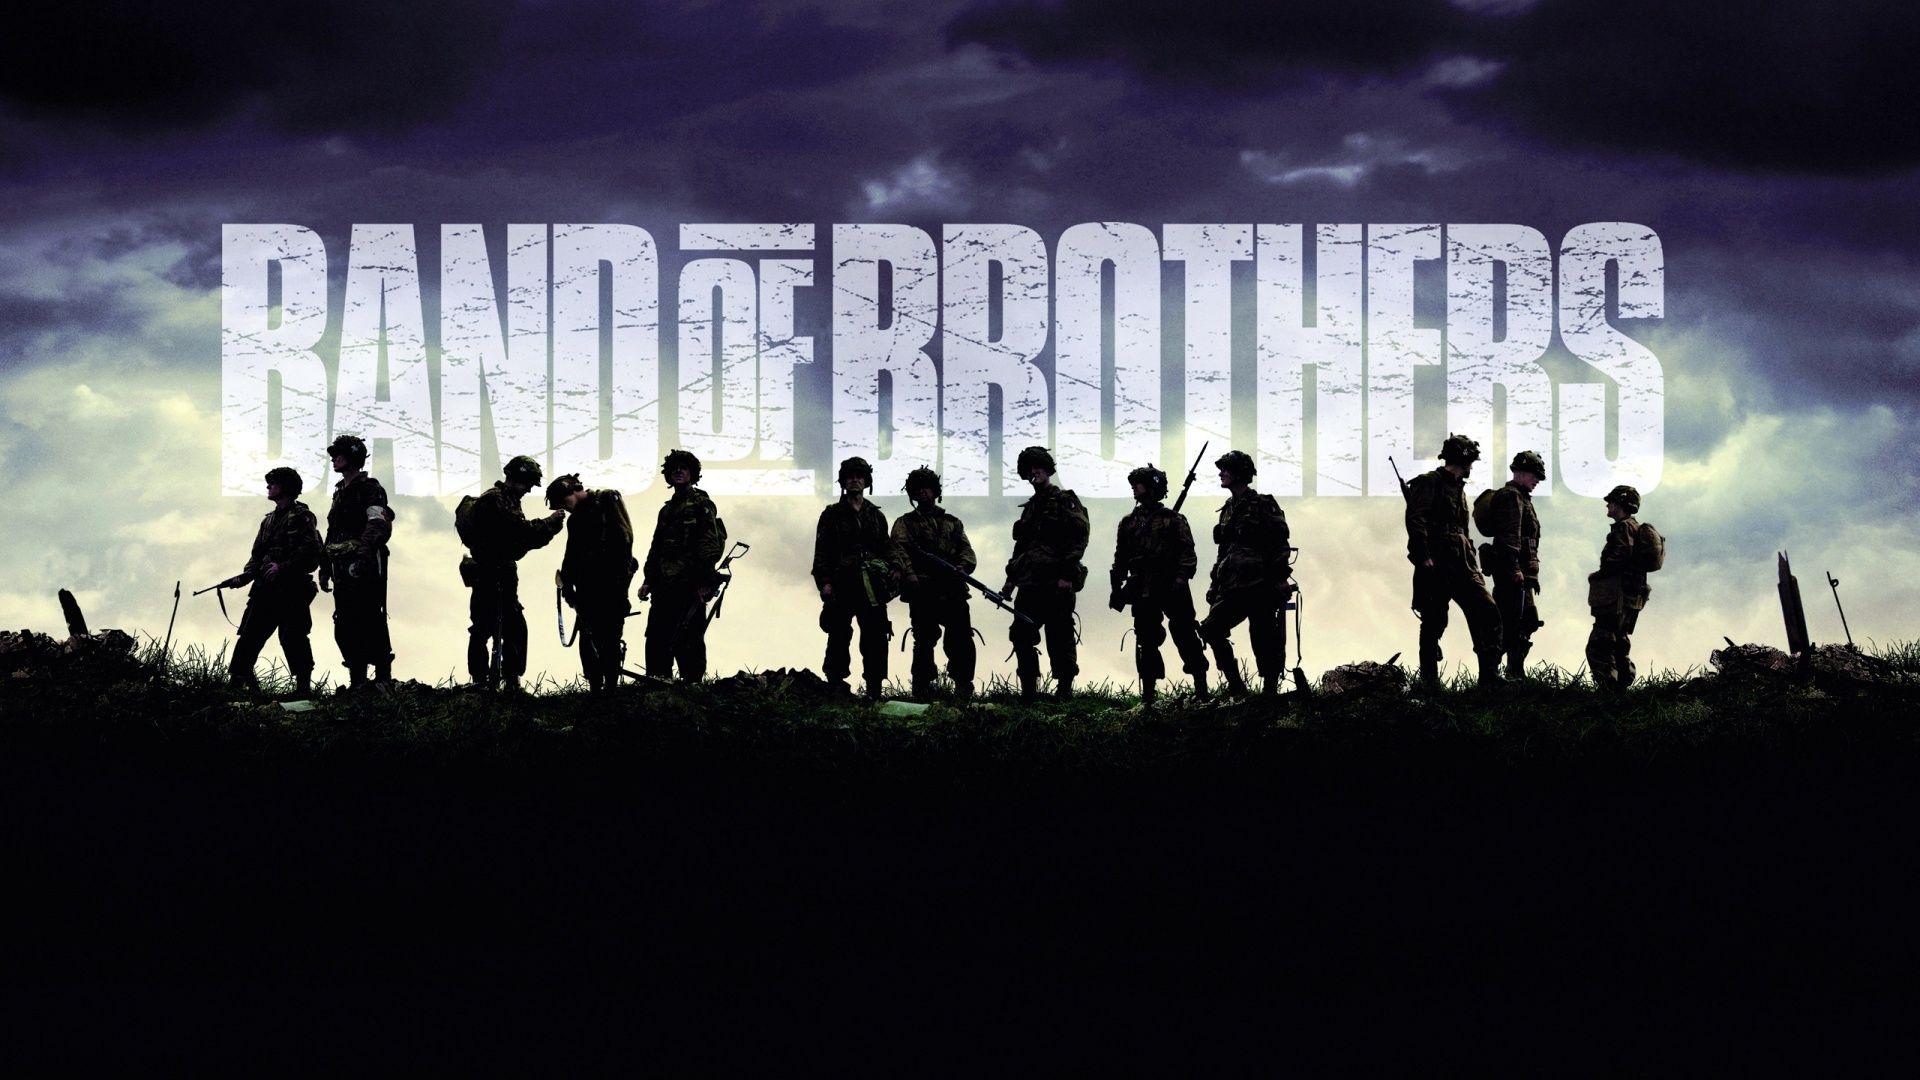 Band of Brothers TV Series Wallpaper in jpg format for free download